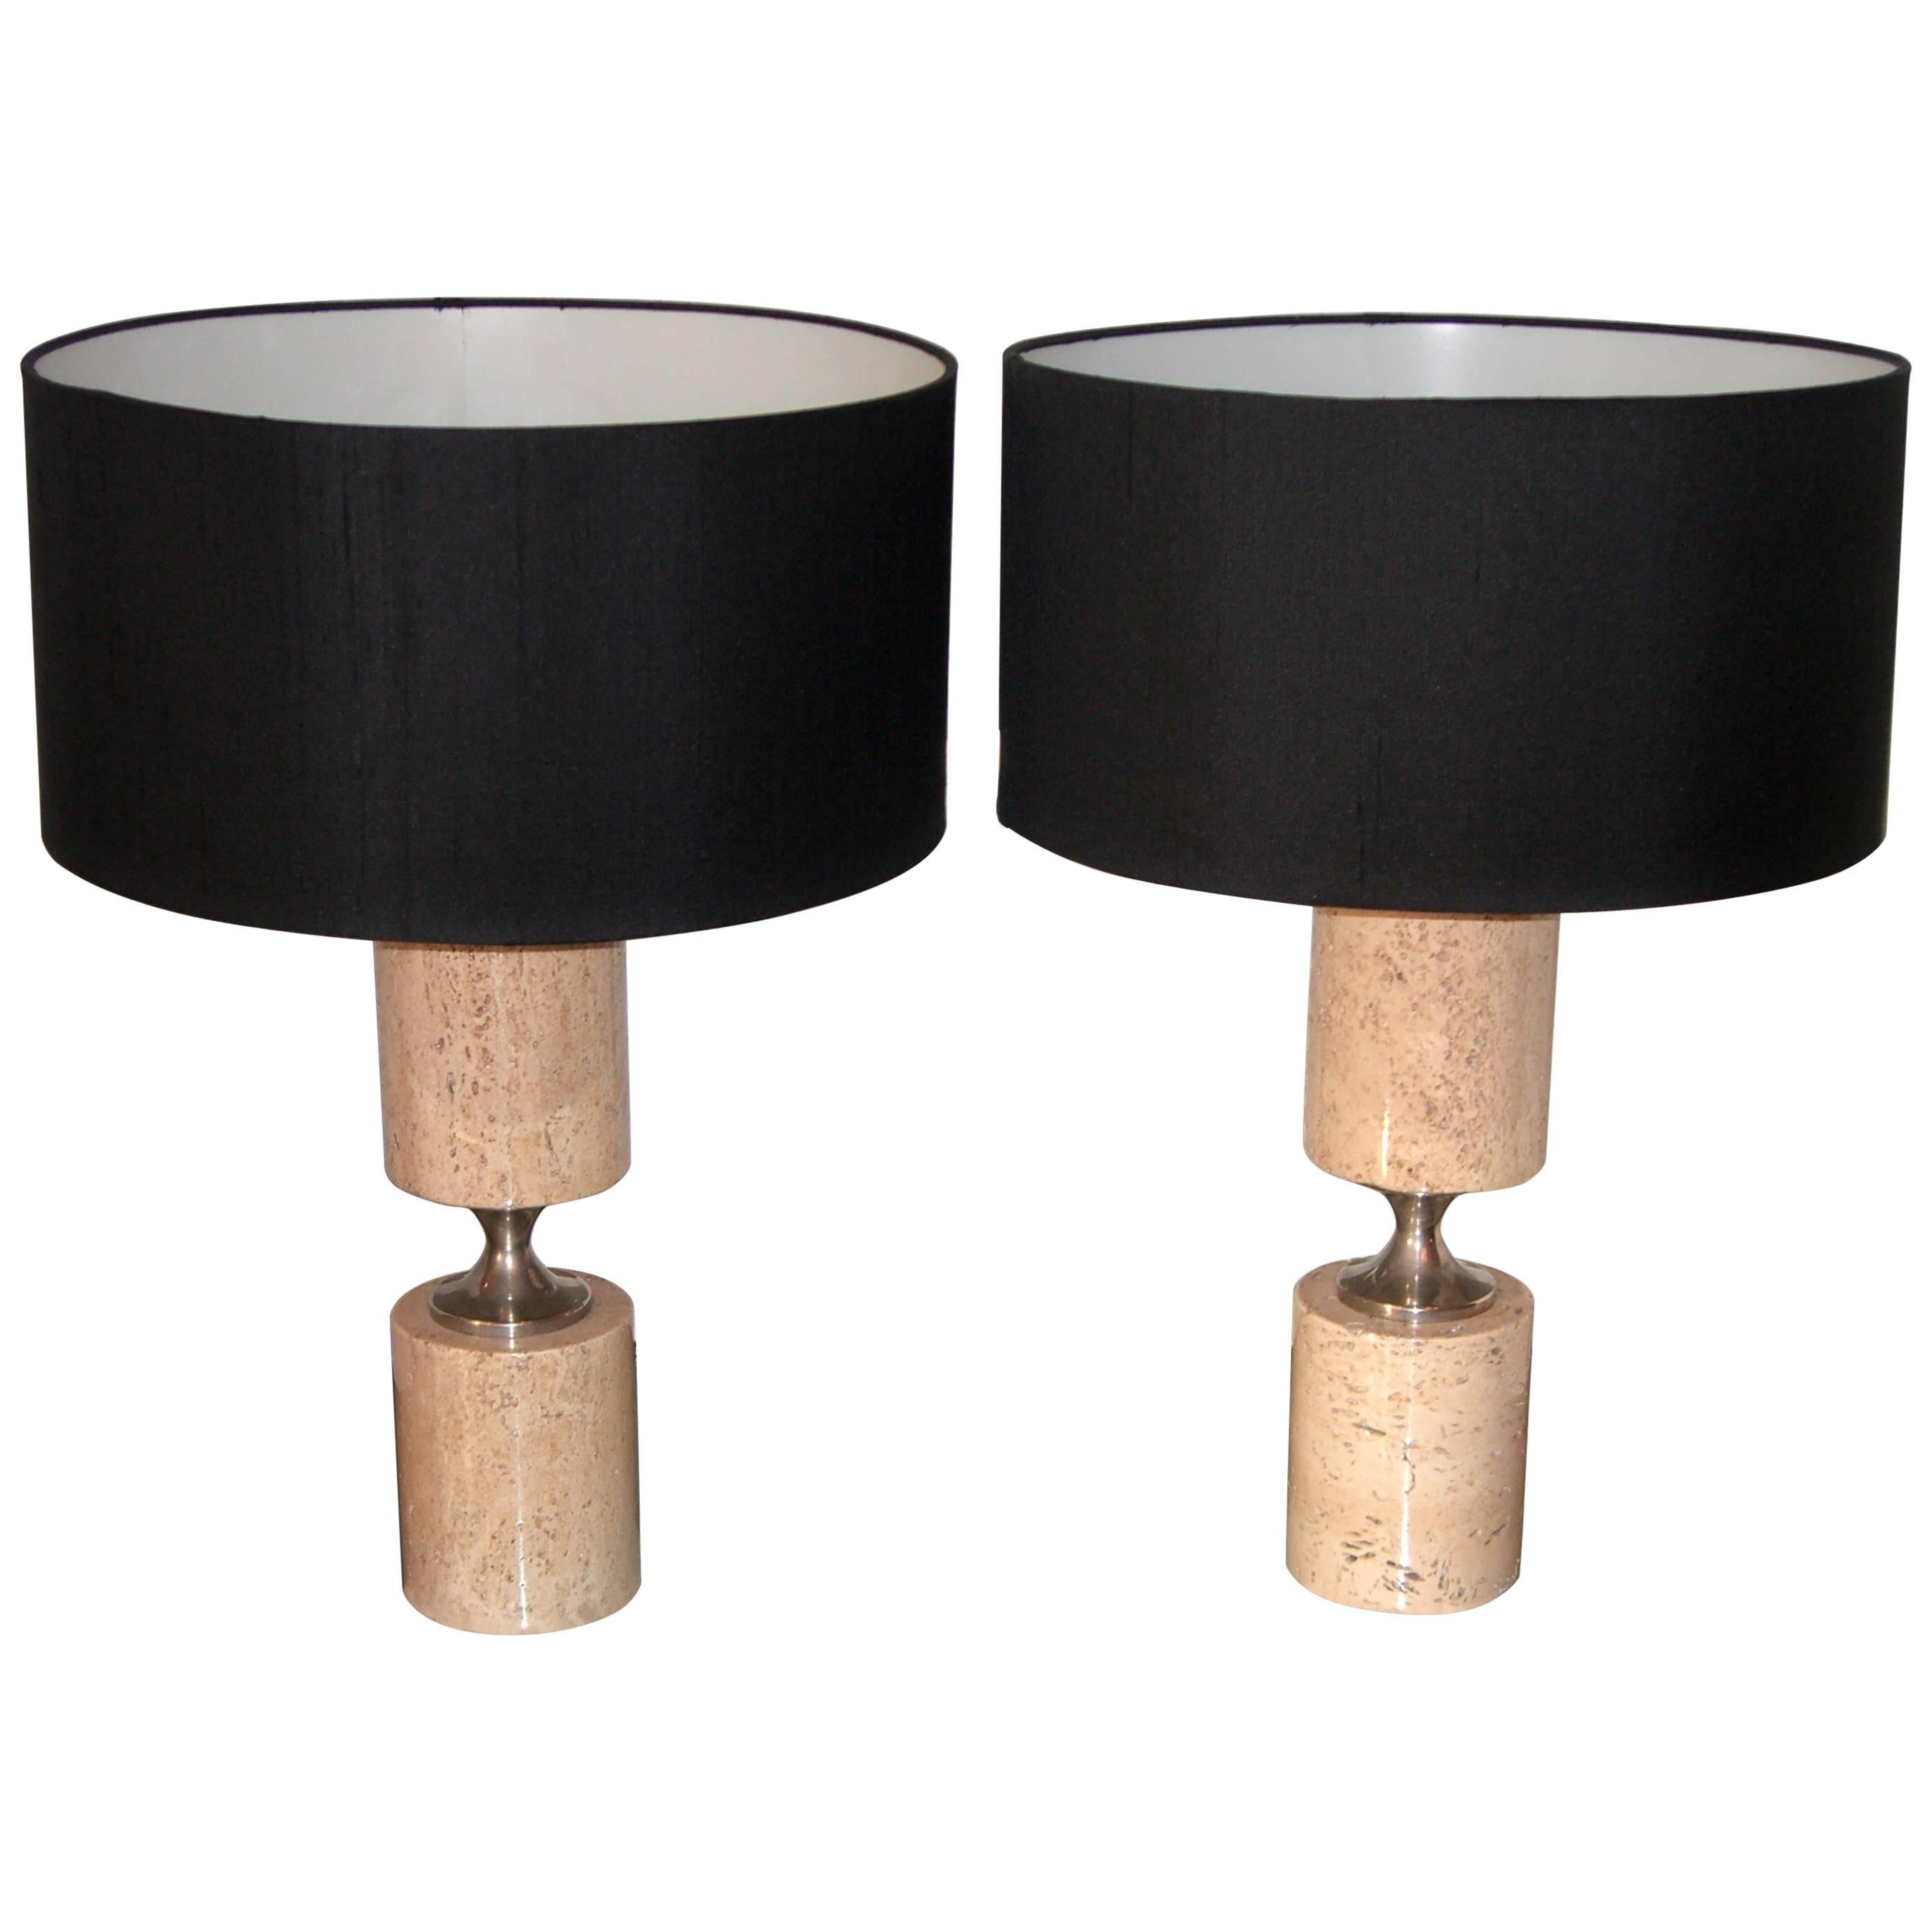 Pair of Travertine and Nickel Table Lamps Attributed to Maison Barbier For Sale